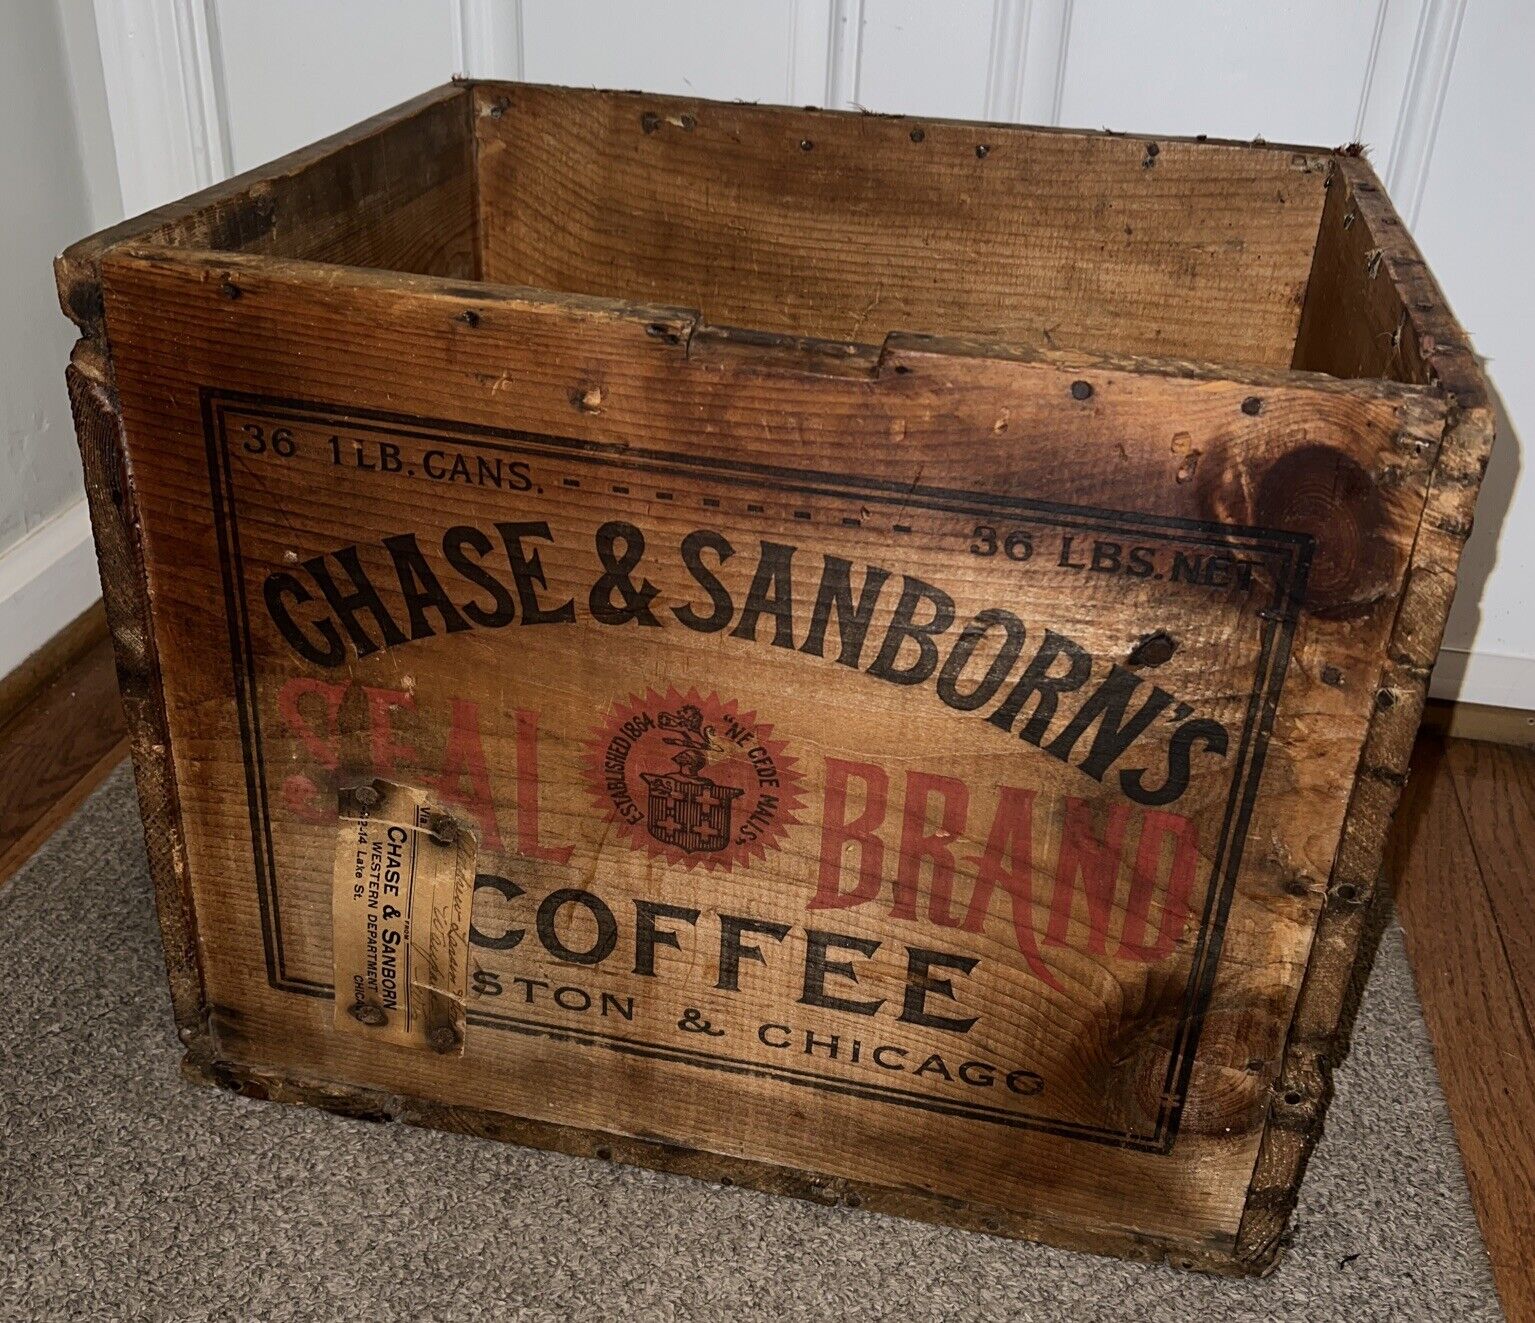 Vintage Chase & Sanborn’s Seal brand Coffee Wood Crate 19x15x15” Boston Chicago